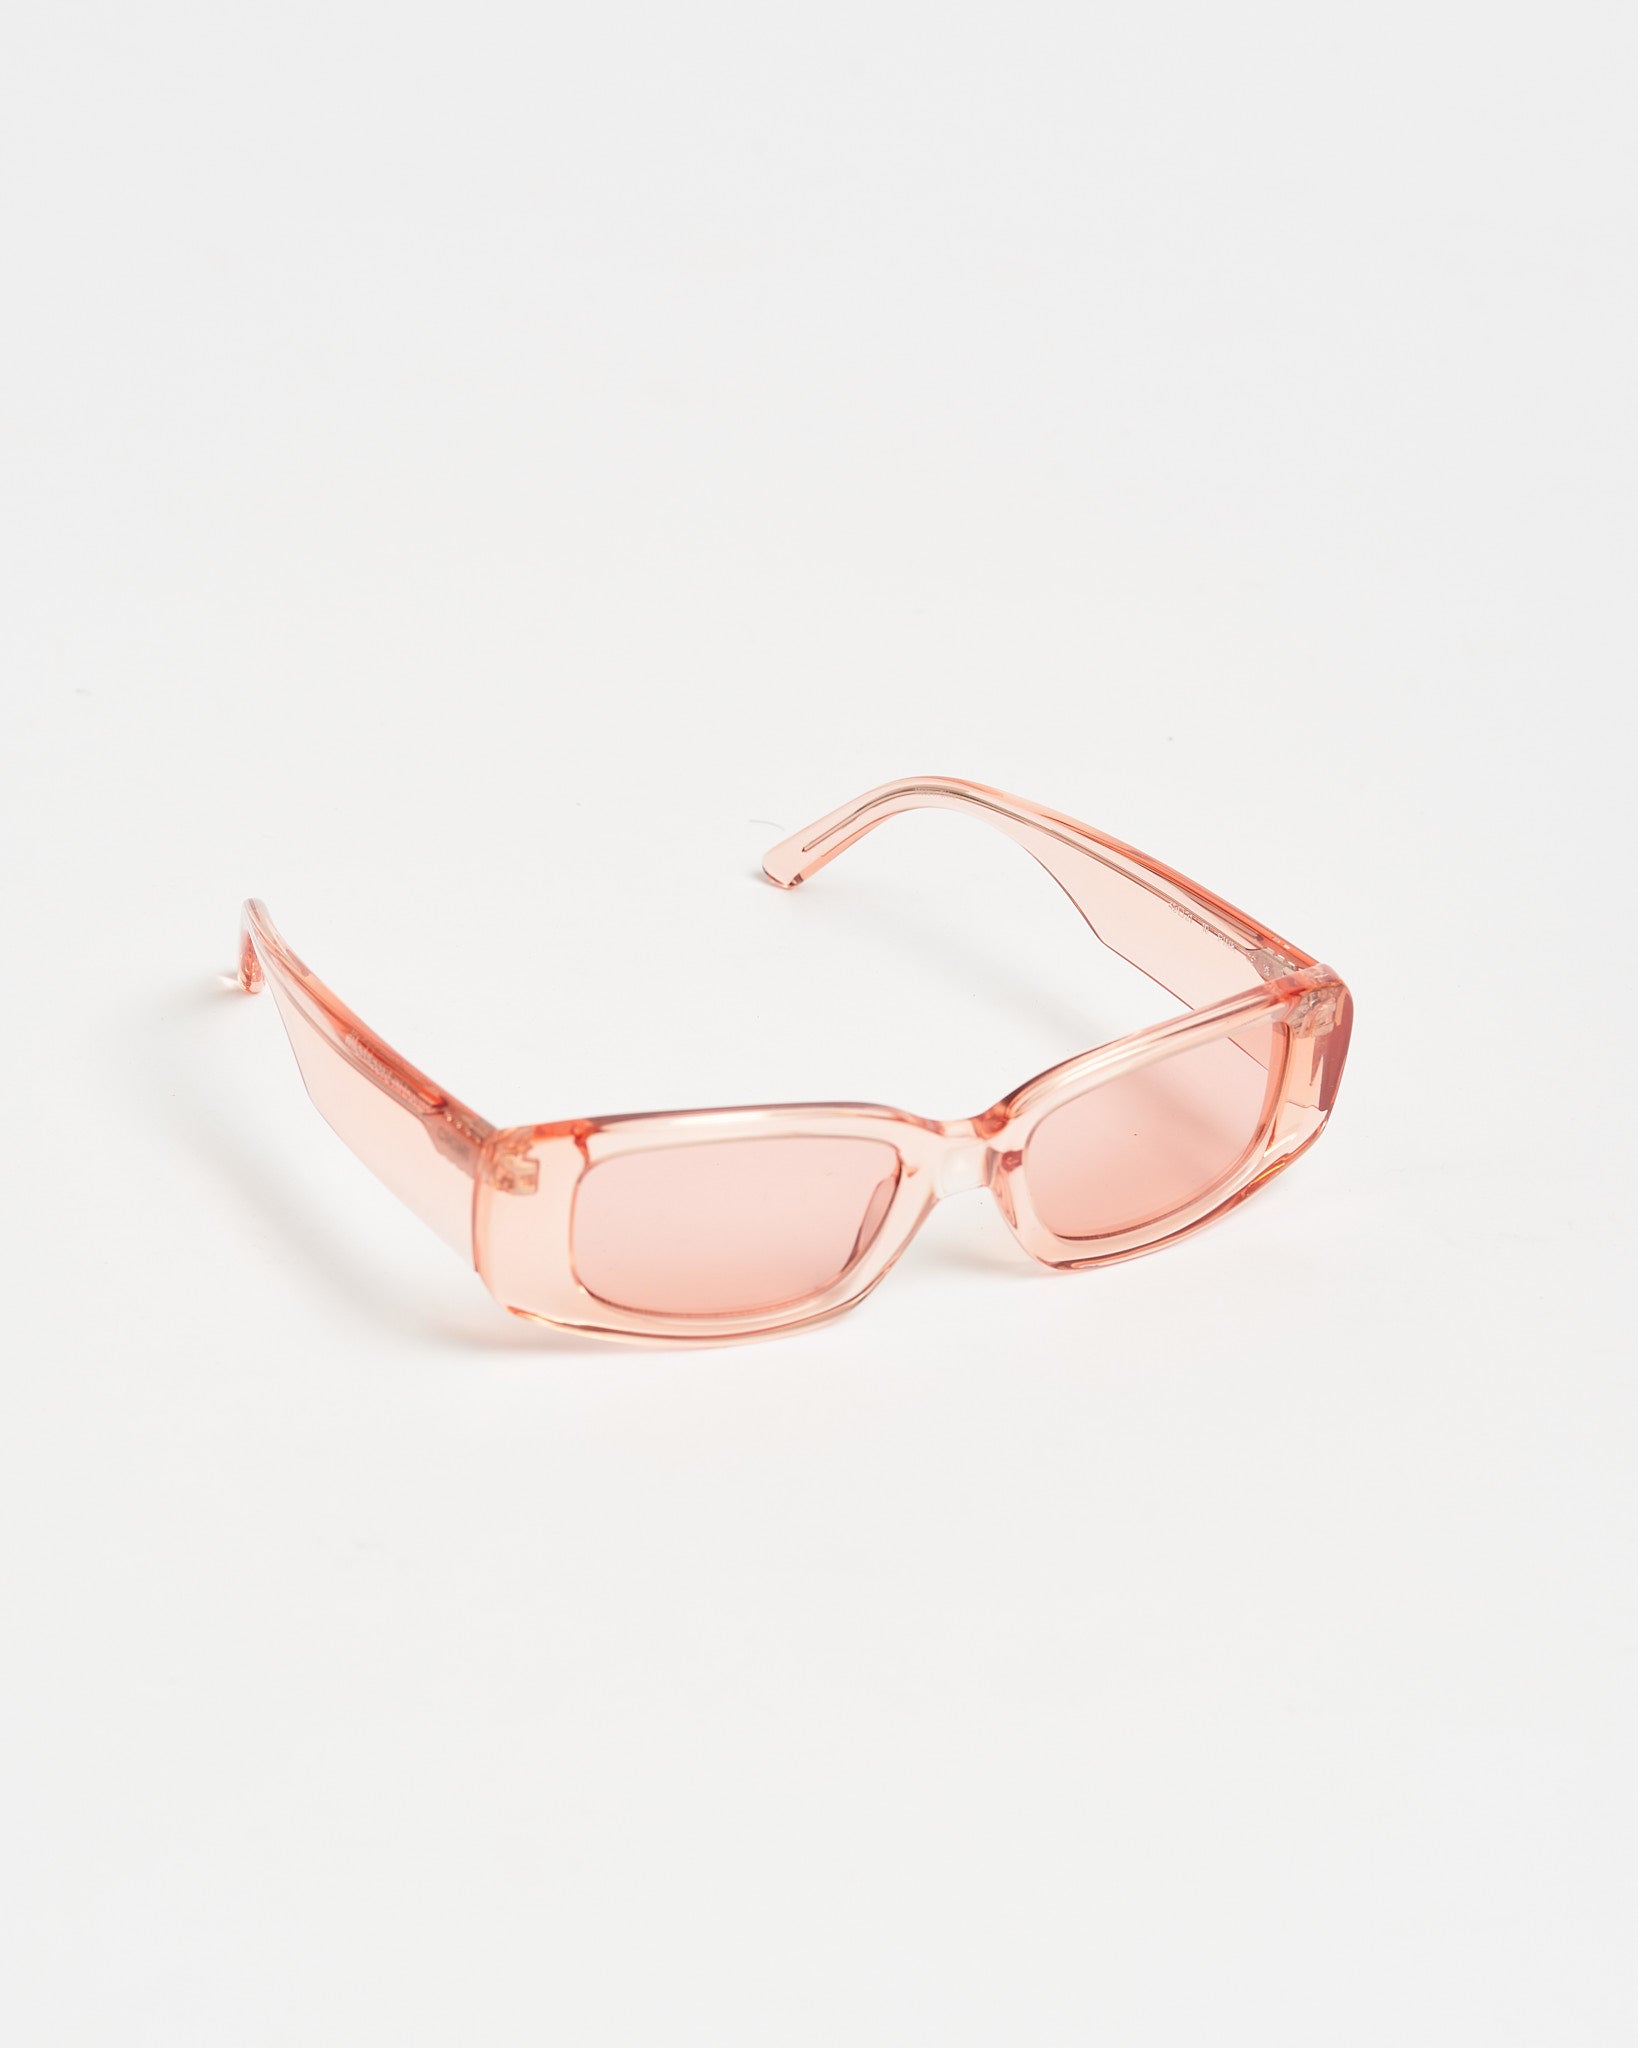 10.2 Sunglasses in Pink